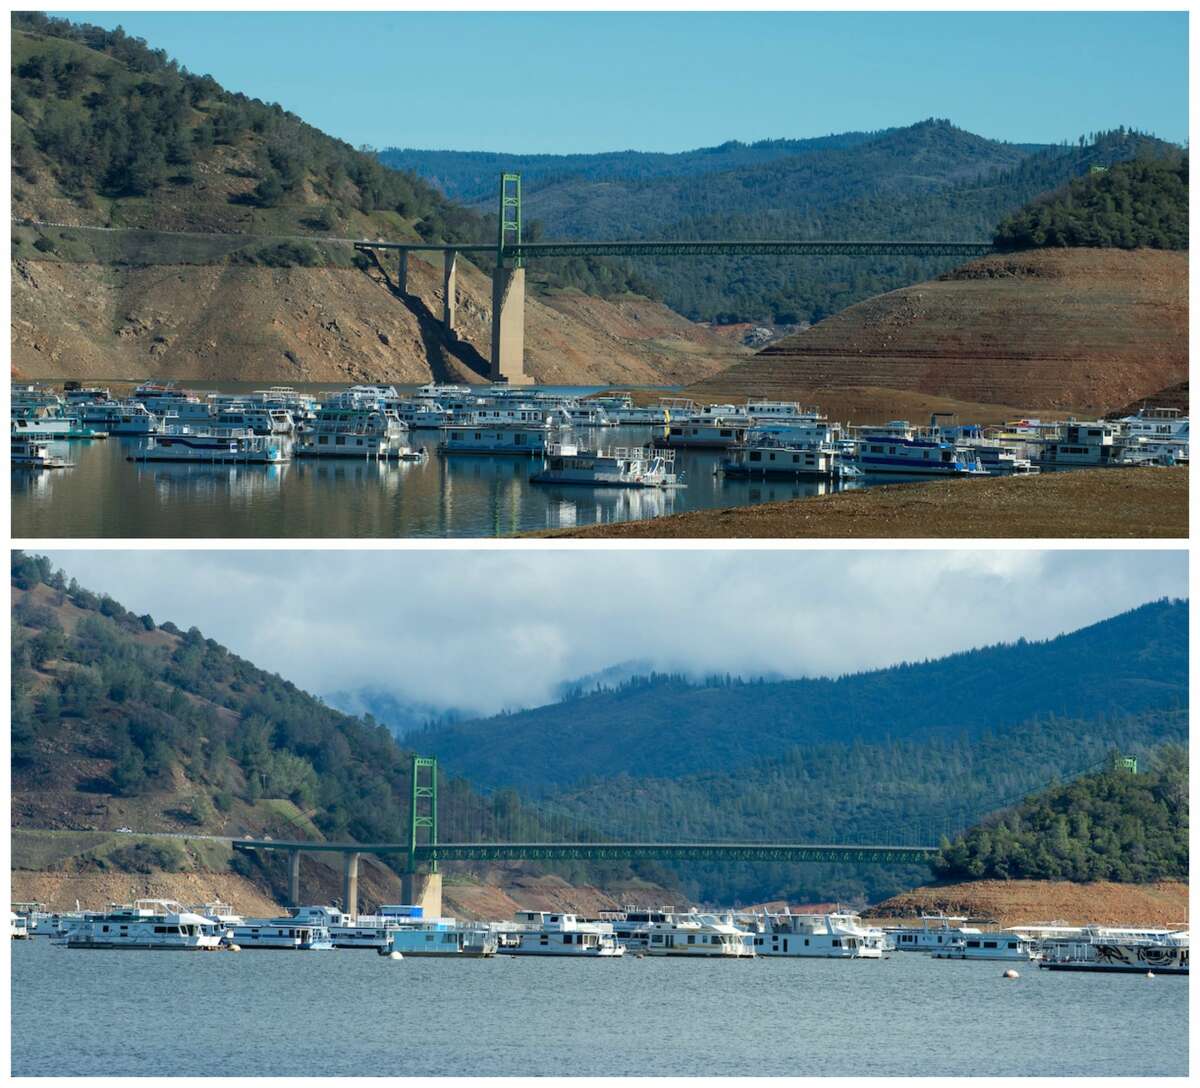 Beforeandafter photos show California storm's insane impact on water